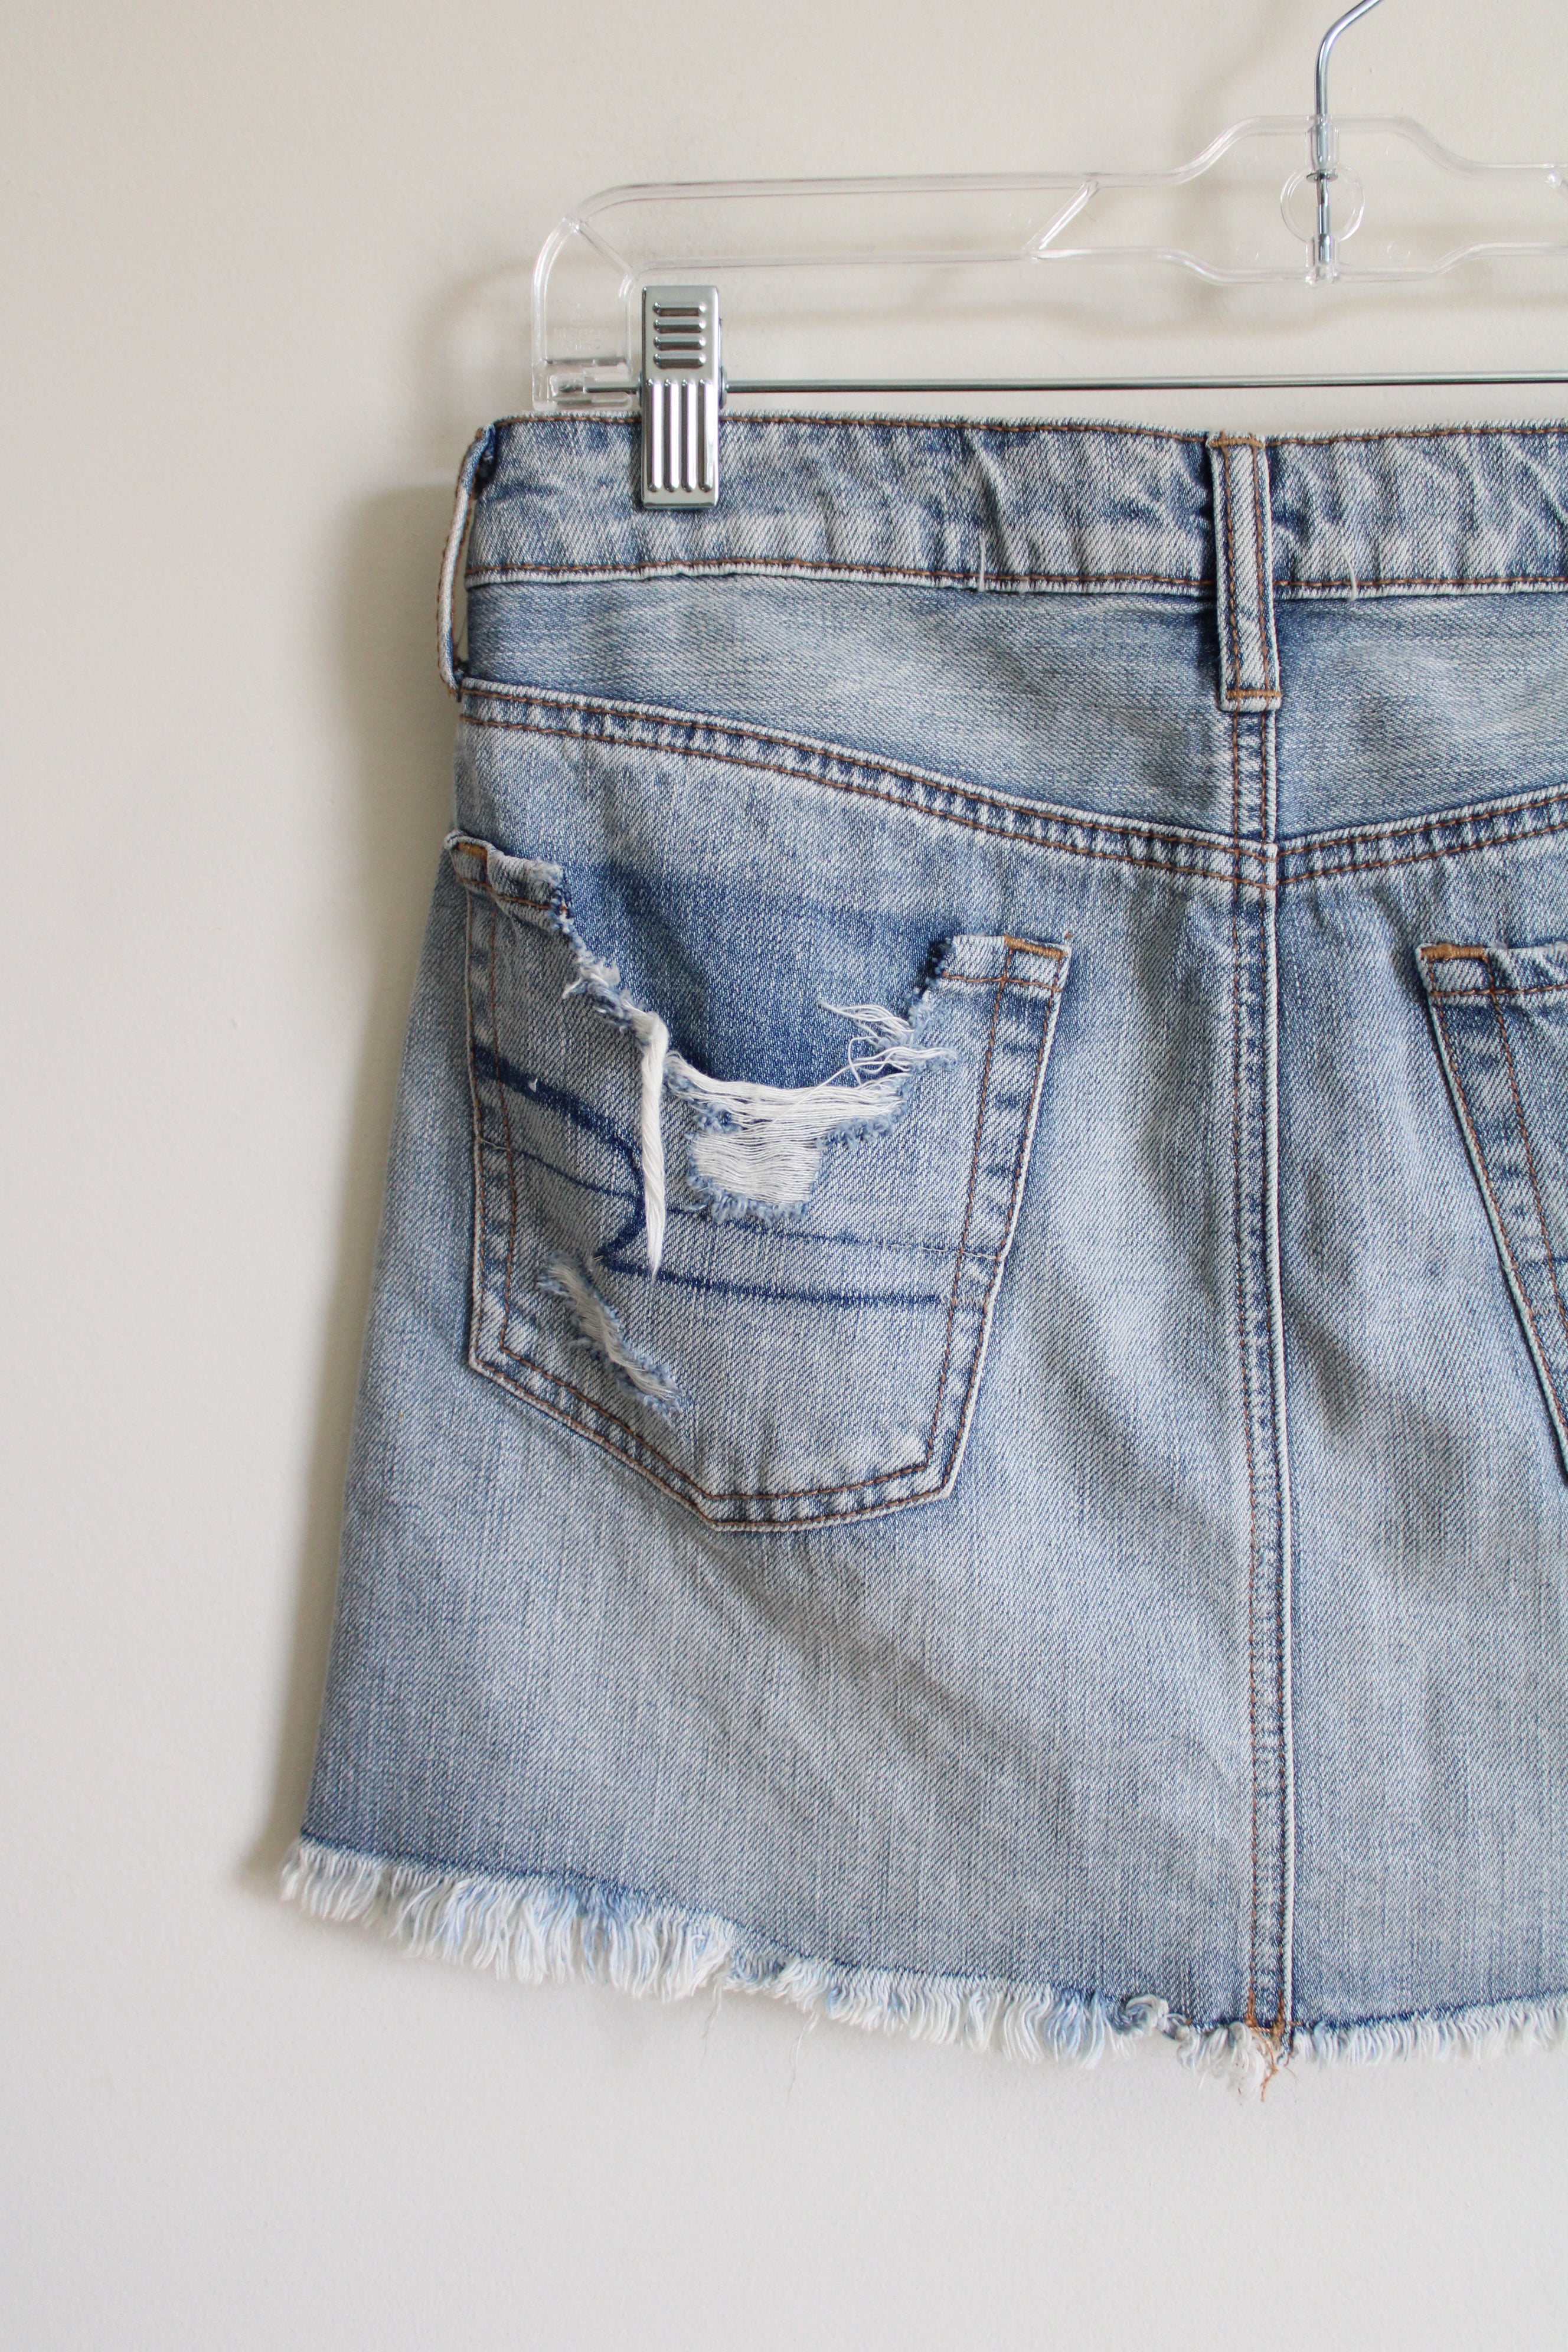 American Eagle Mini Jean Skirt Size 2 - $15 (70% Off Retail) - From Paige